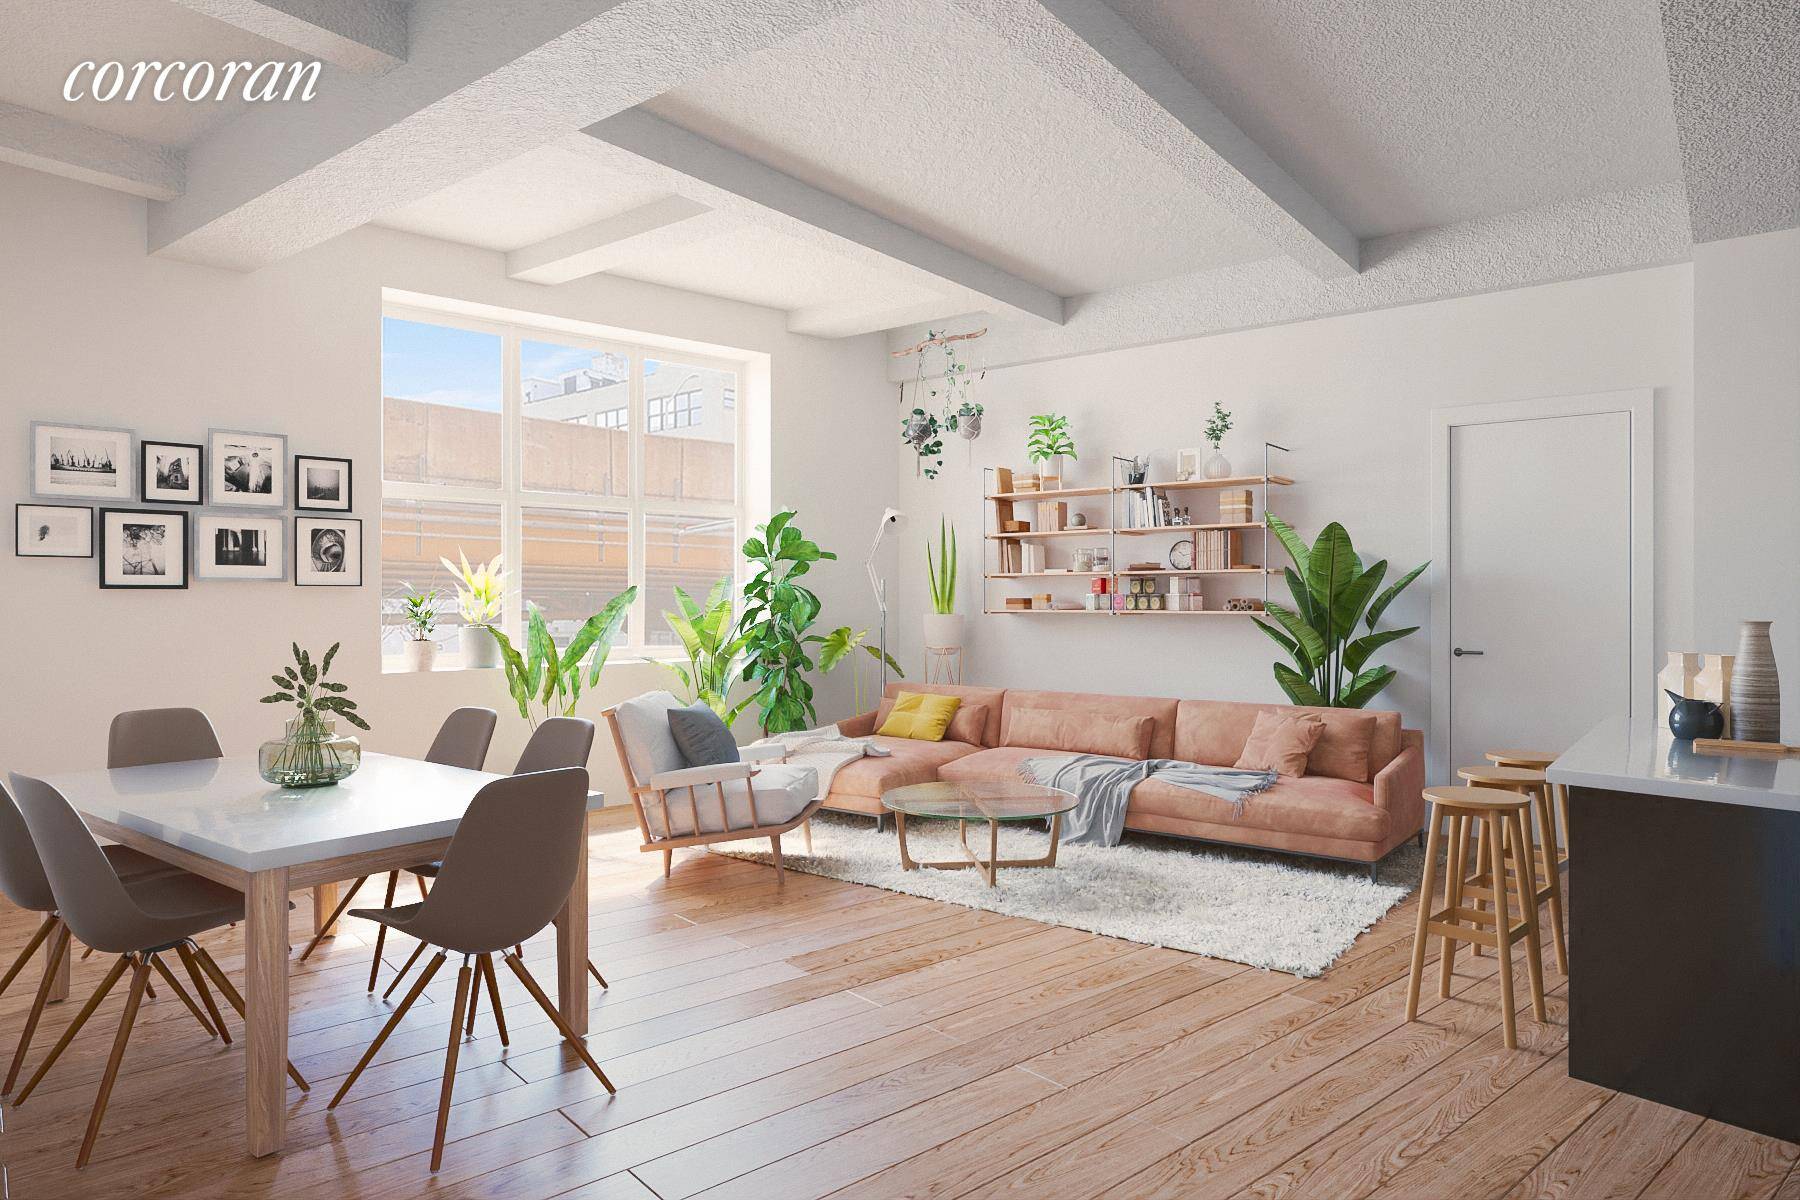 Experience authentic loft living at the redesigned 275 Park AvenueThis expansive 3 bedroom home is an incredible 1400 square feet with soaring ceilings, oversized windows, and wide plank hardwood floors.